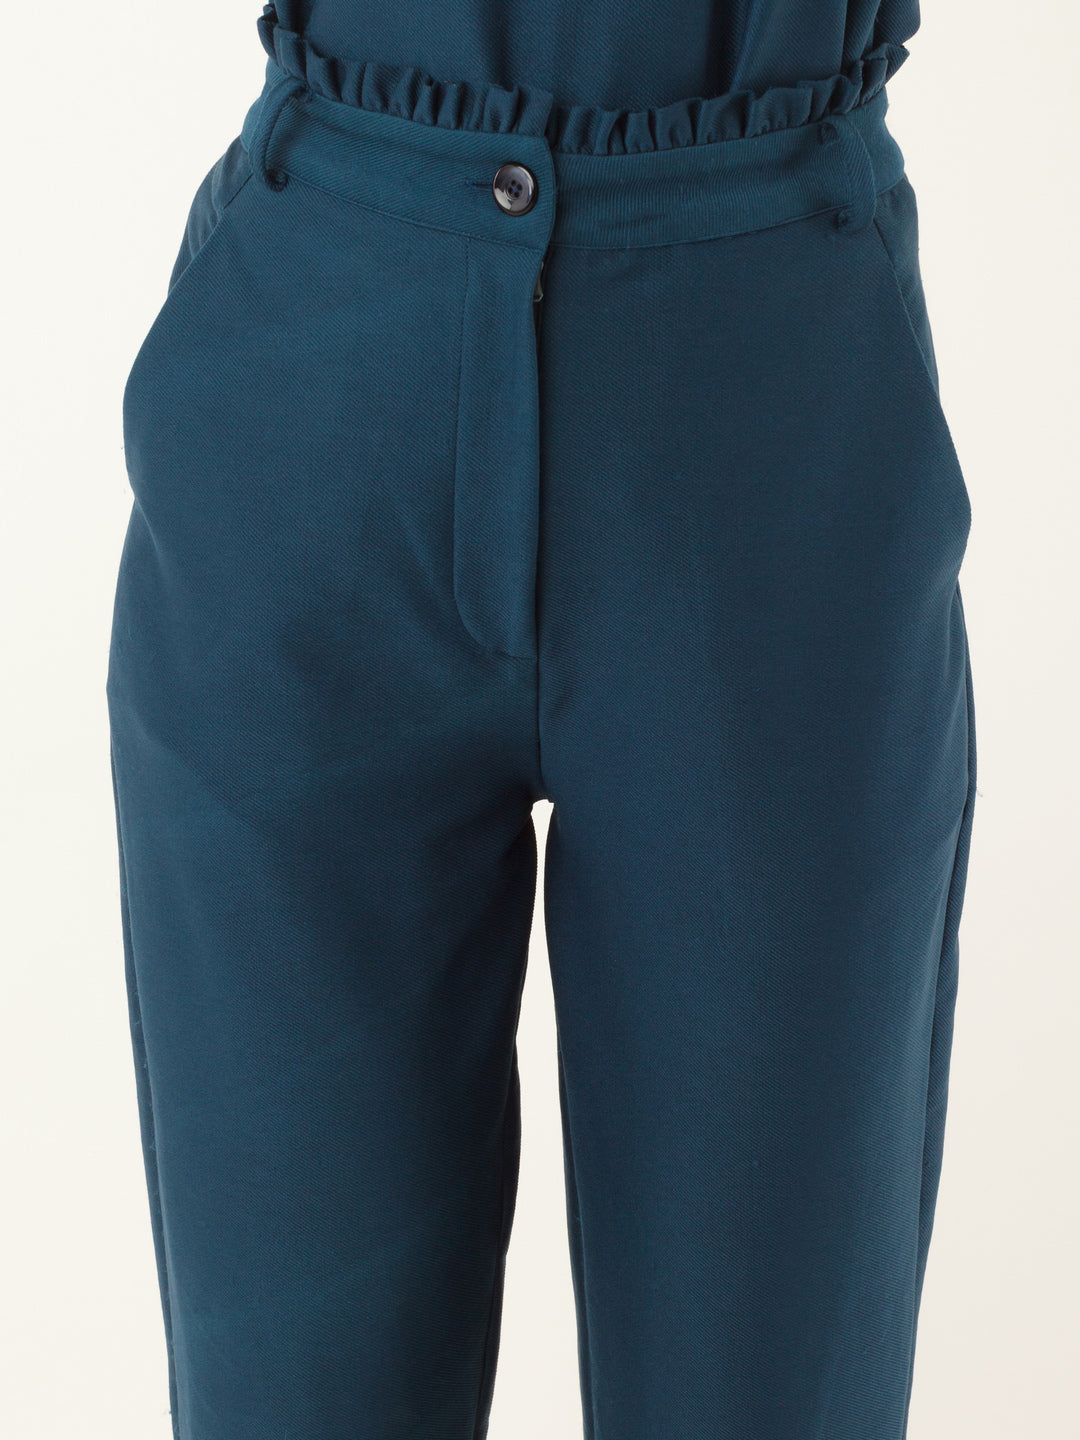 Blue Solid Pleated Trouser For Women